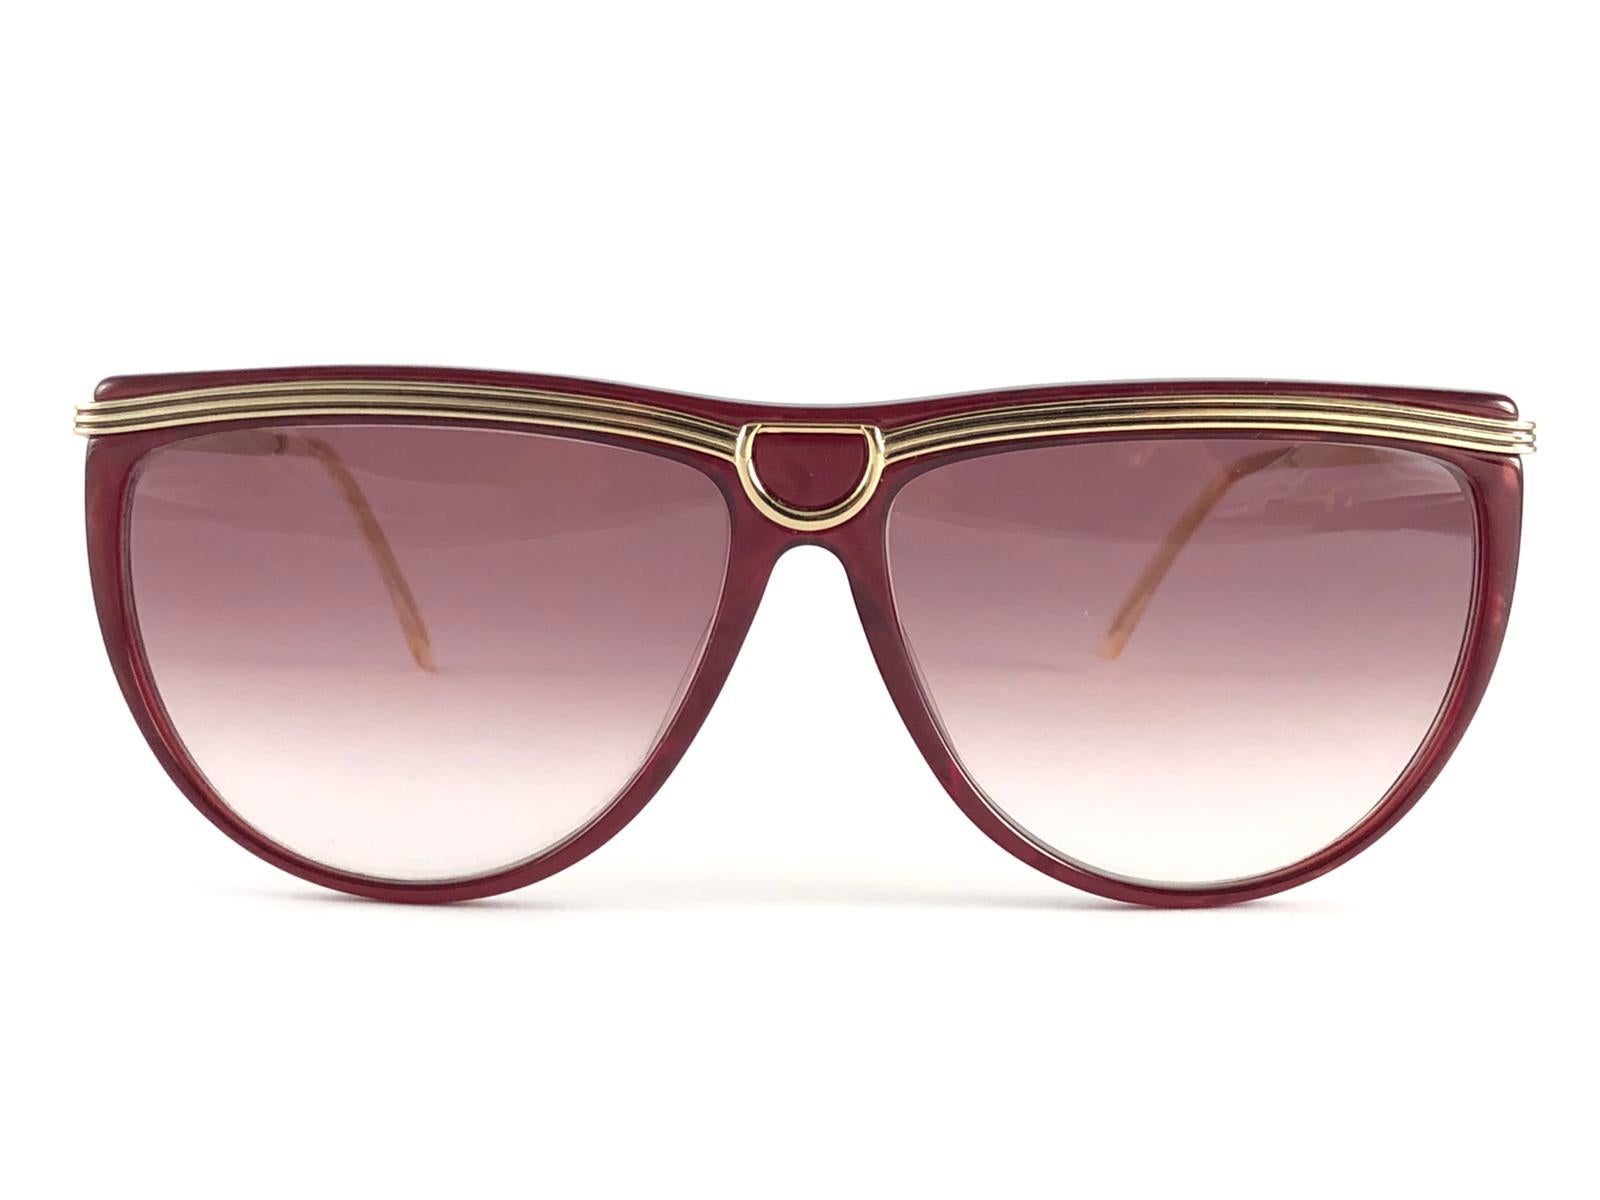 New Vintage Gucci sleek burgundy & gold accents frame with light gradient pink lenses. 

New never worn or displayed. 

This item could show minor sign of wear due to nearly 30 years of storage. Made in Italy.

Front                       13.5  